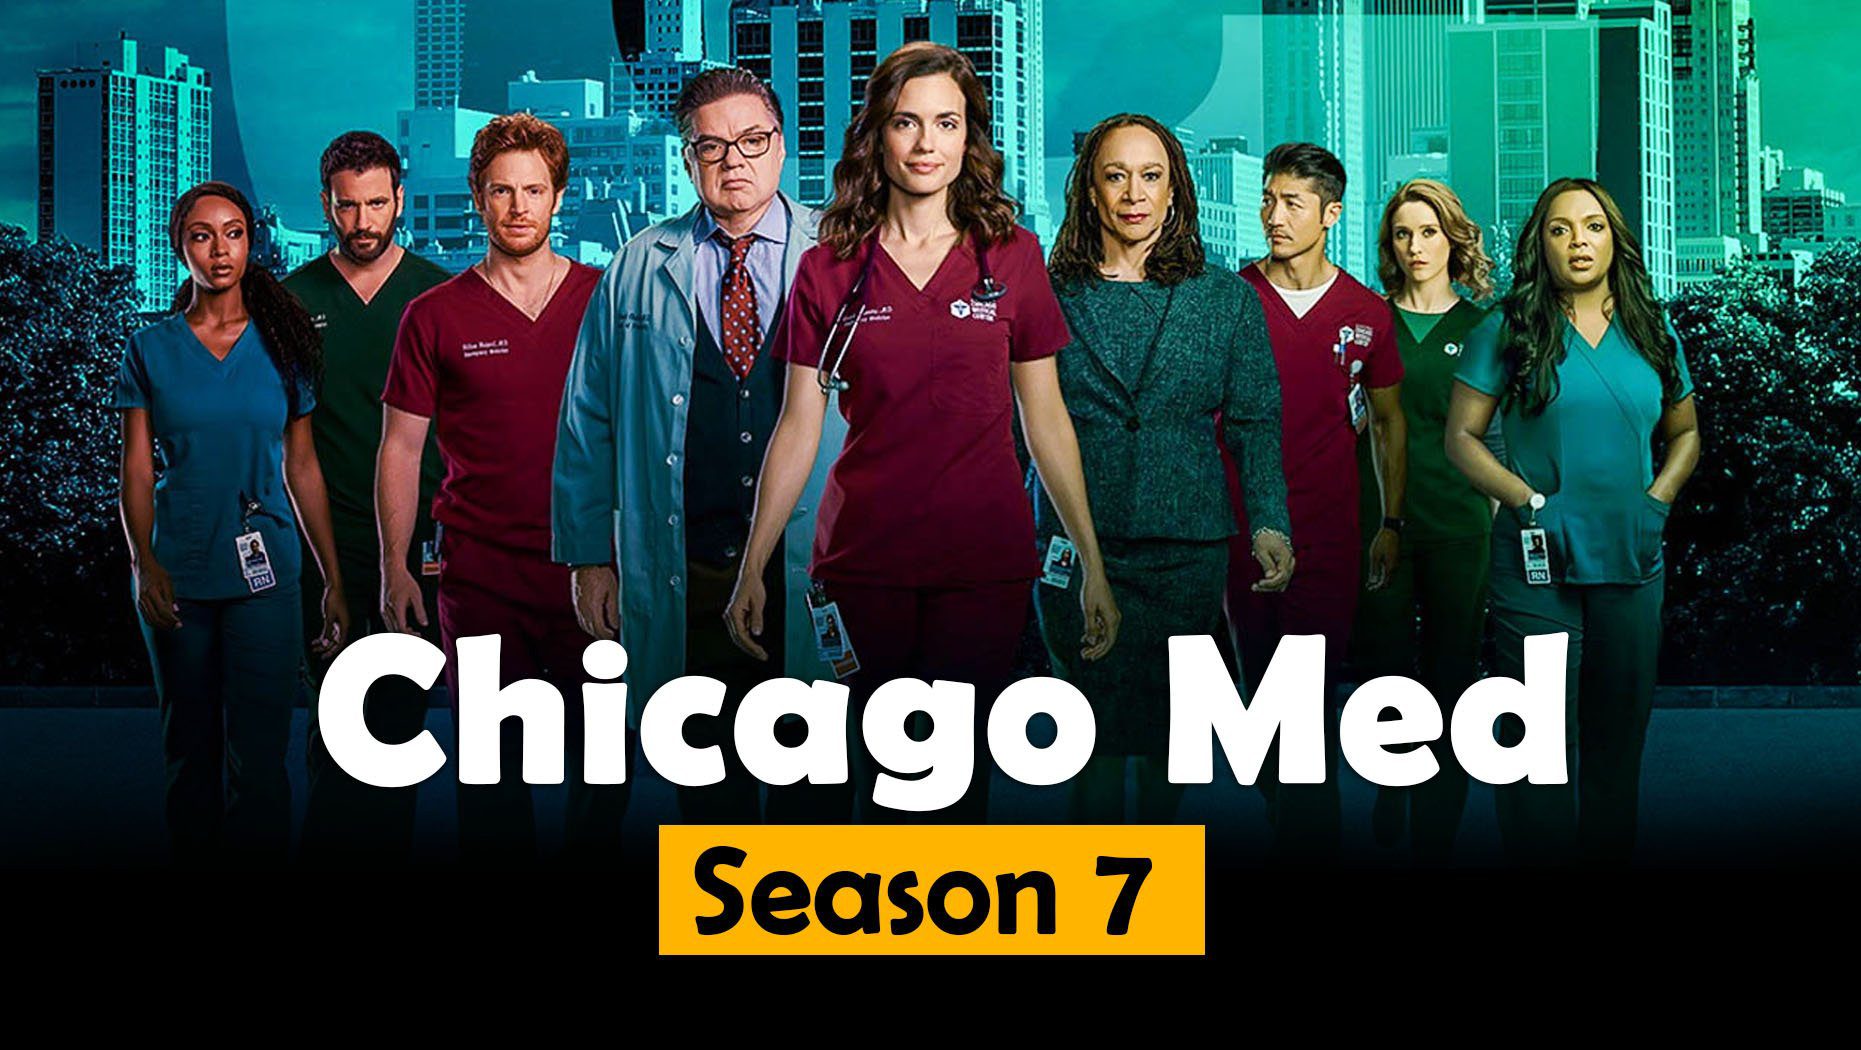 Chicago Med Season 7 Episode 1 Release Date And Preview Otakukart